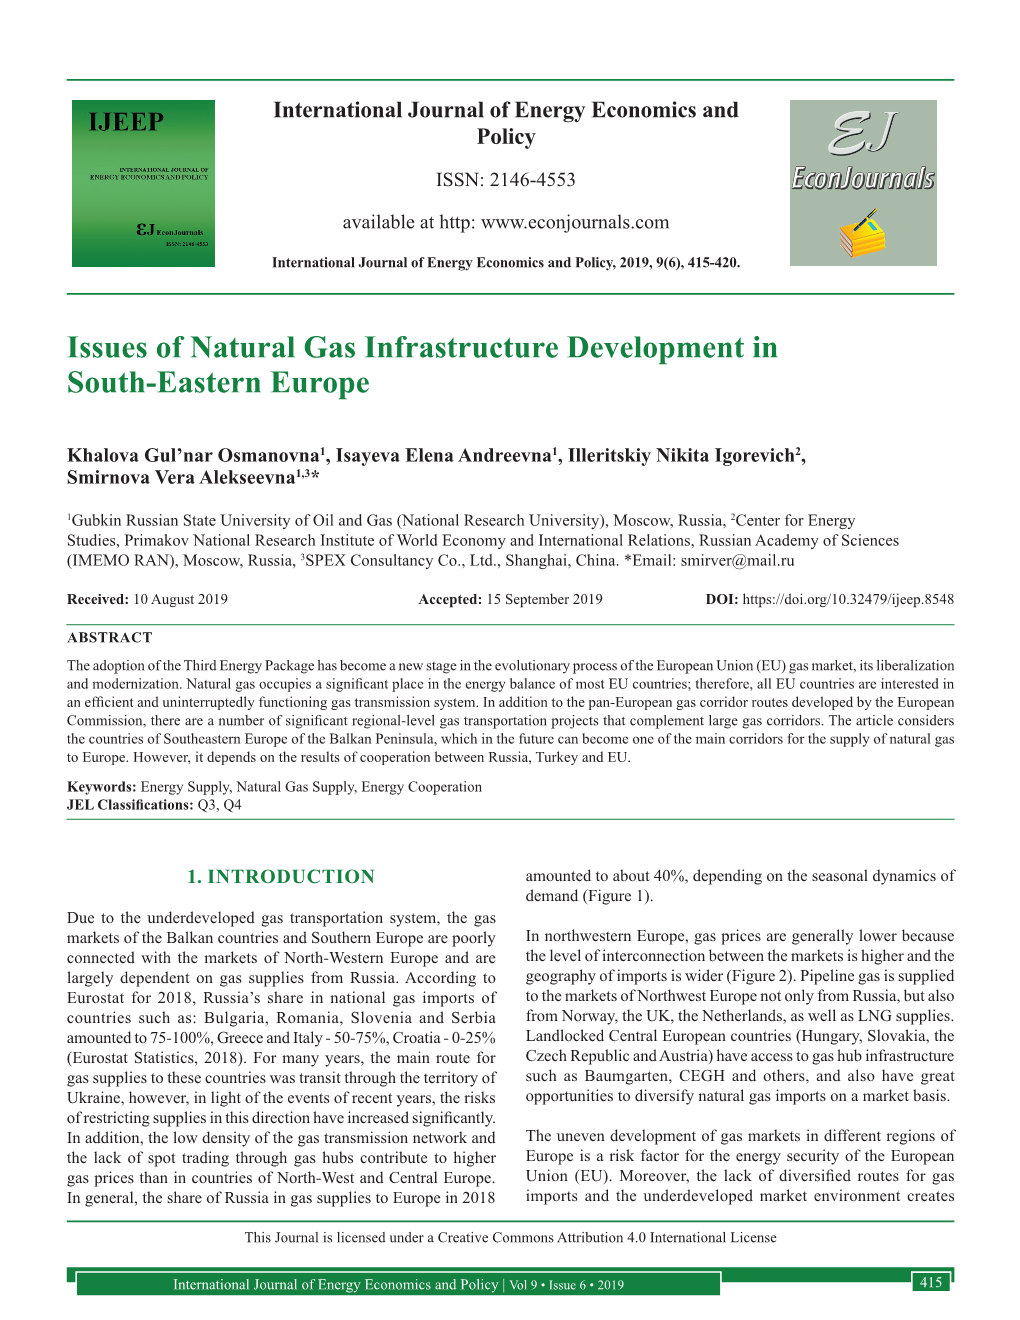 Issues of Natural Gas Infrastructure Development in South-Eastern Europe